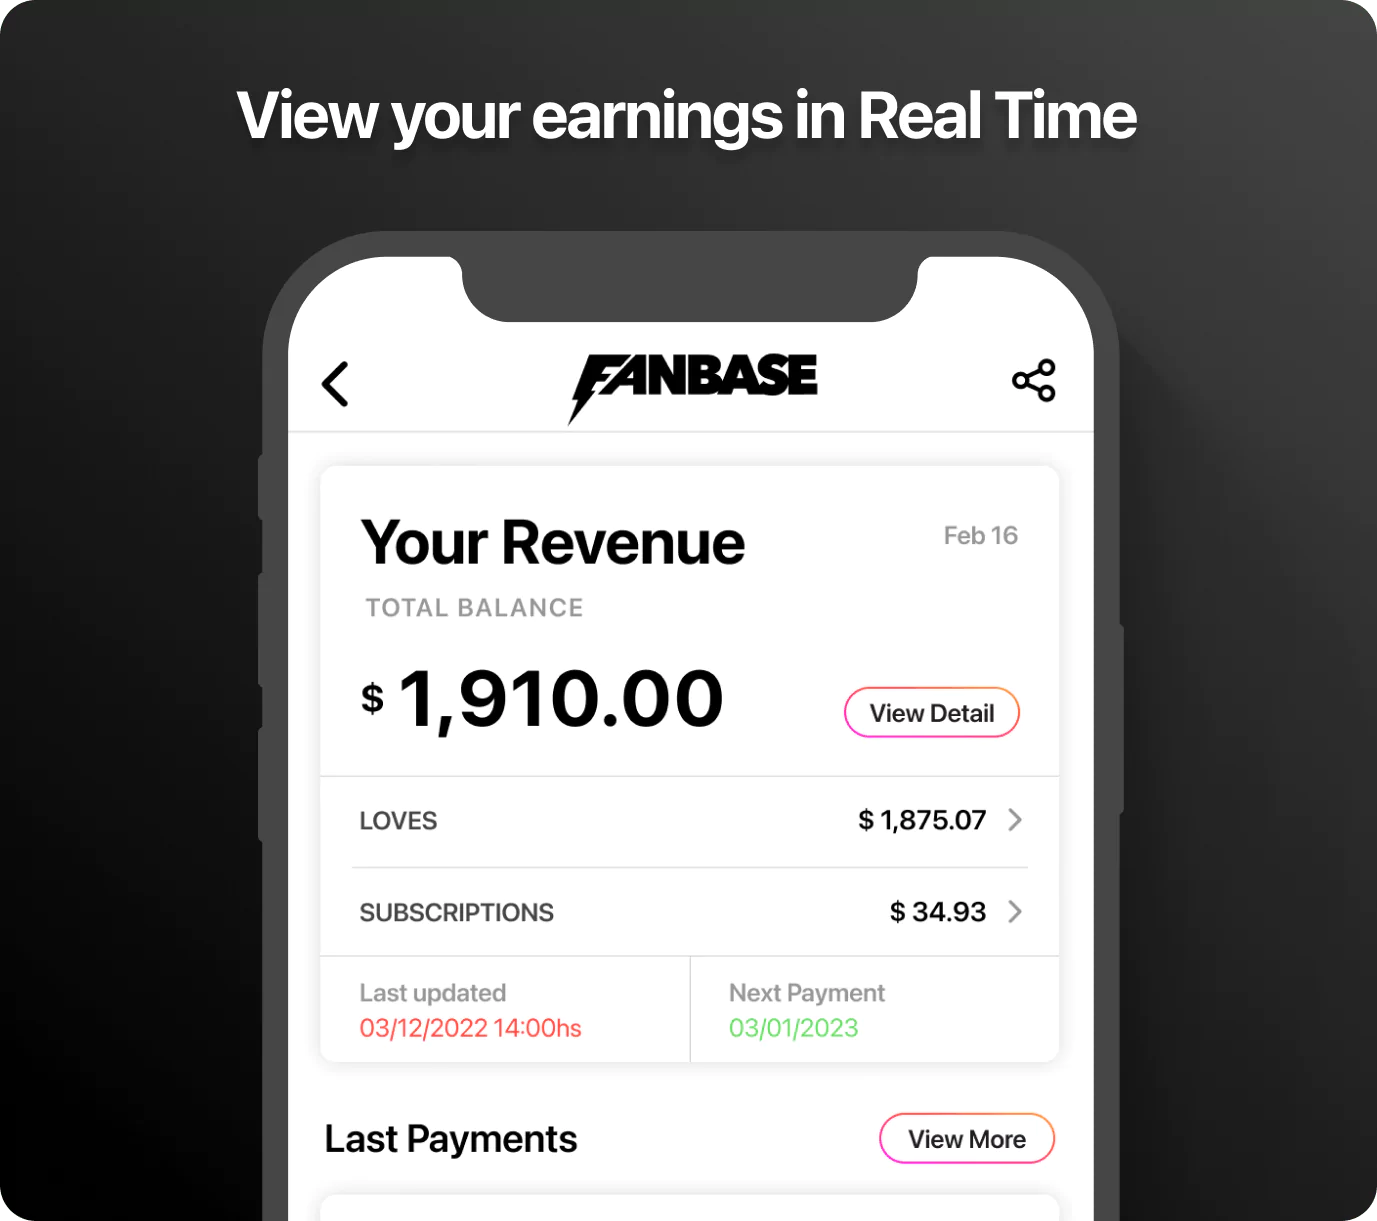 View your earnings in Real Time